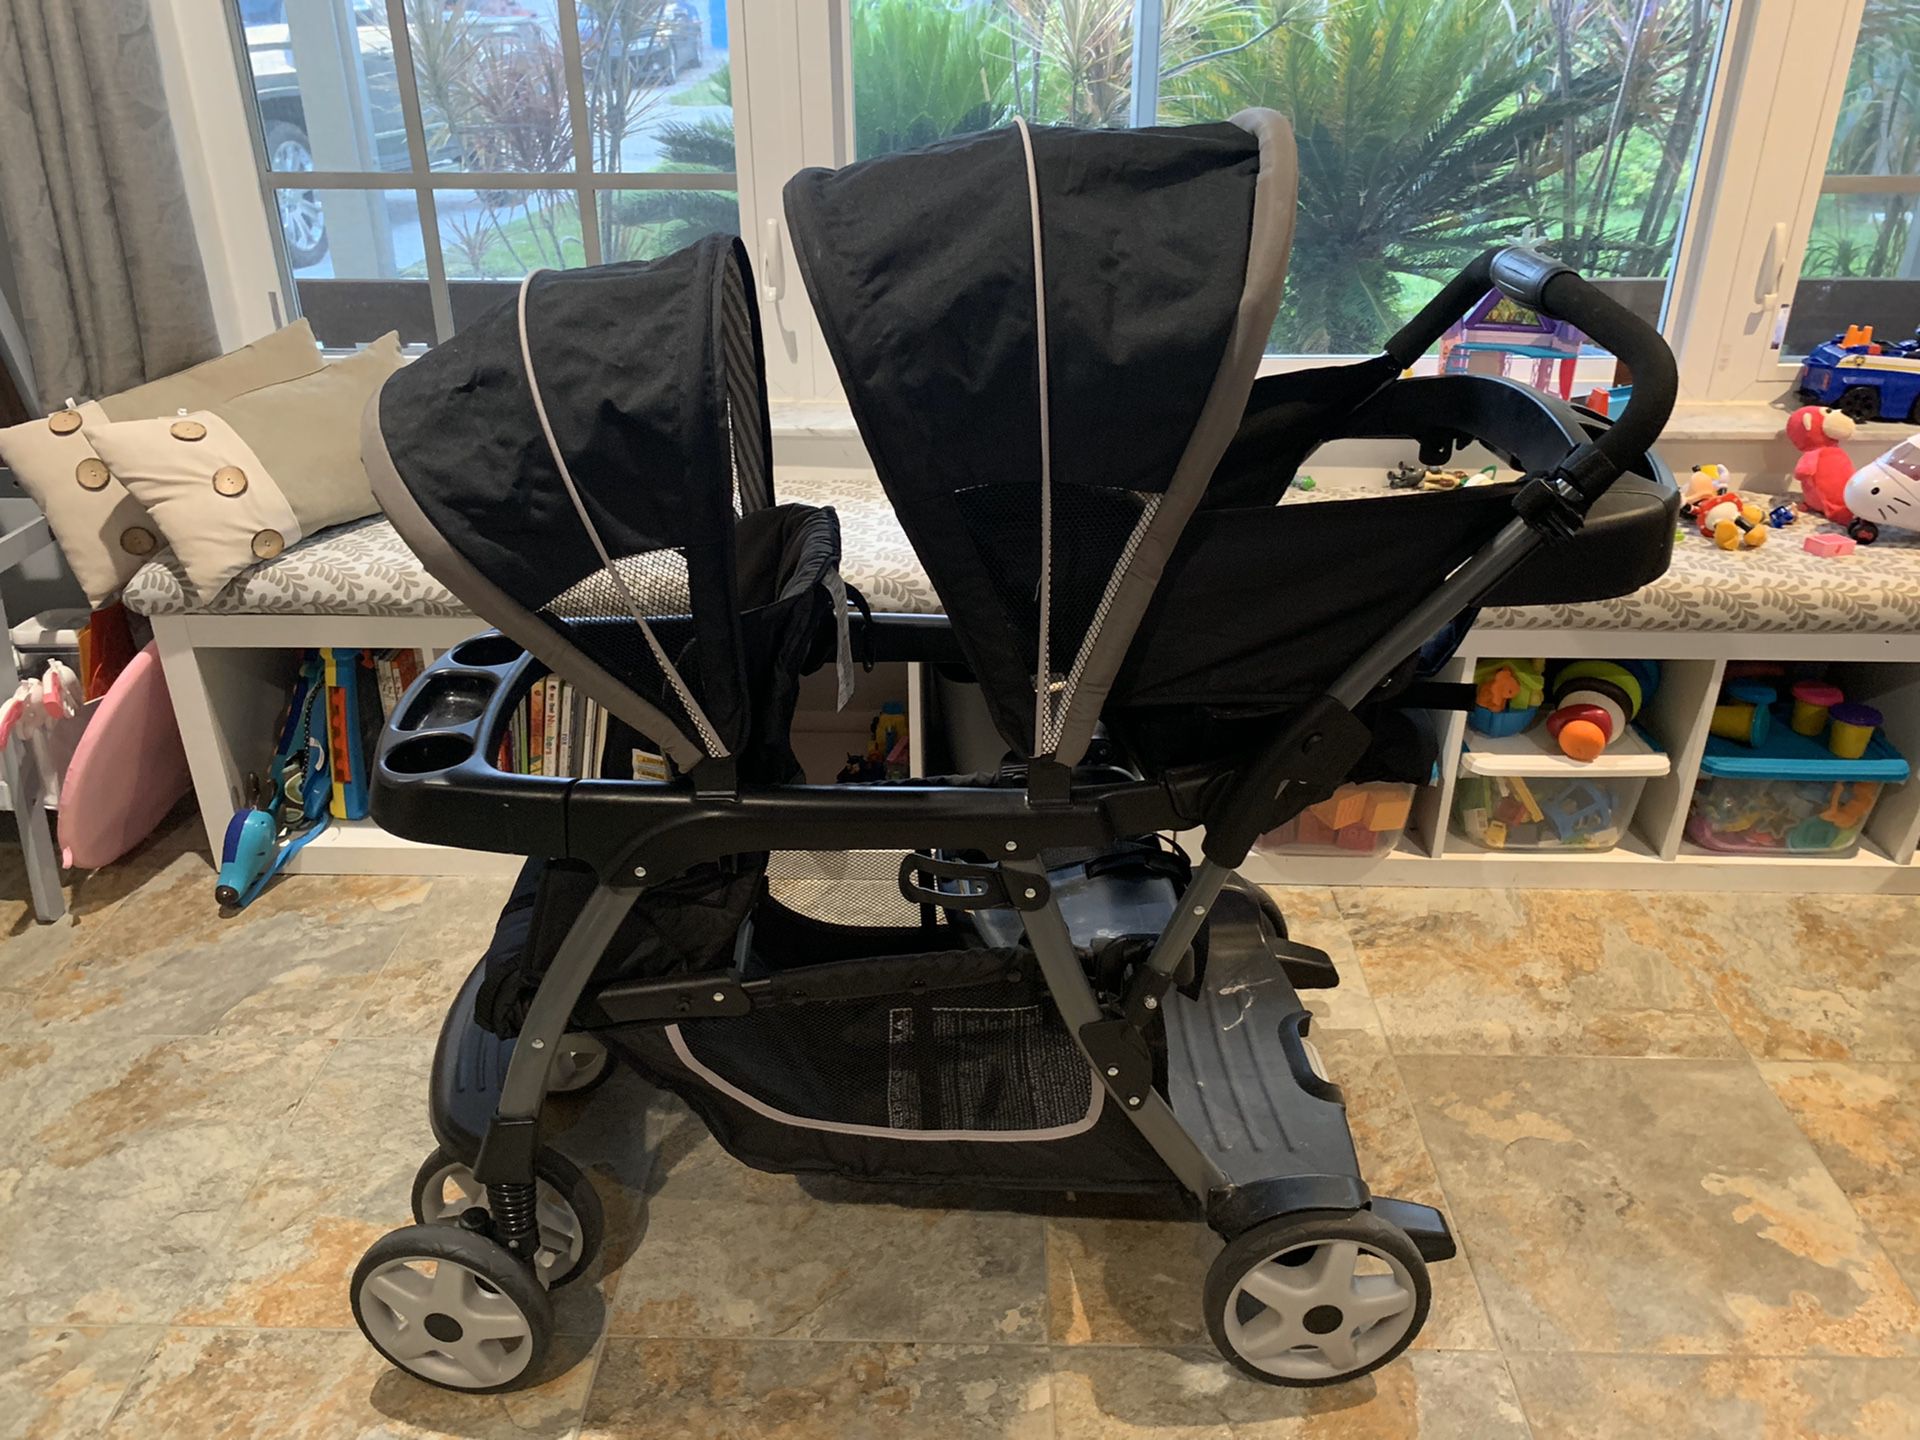 Graco double stroller with infant seat